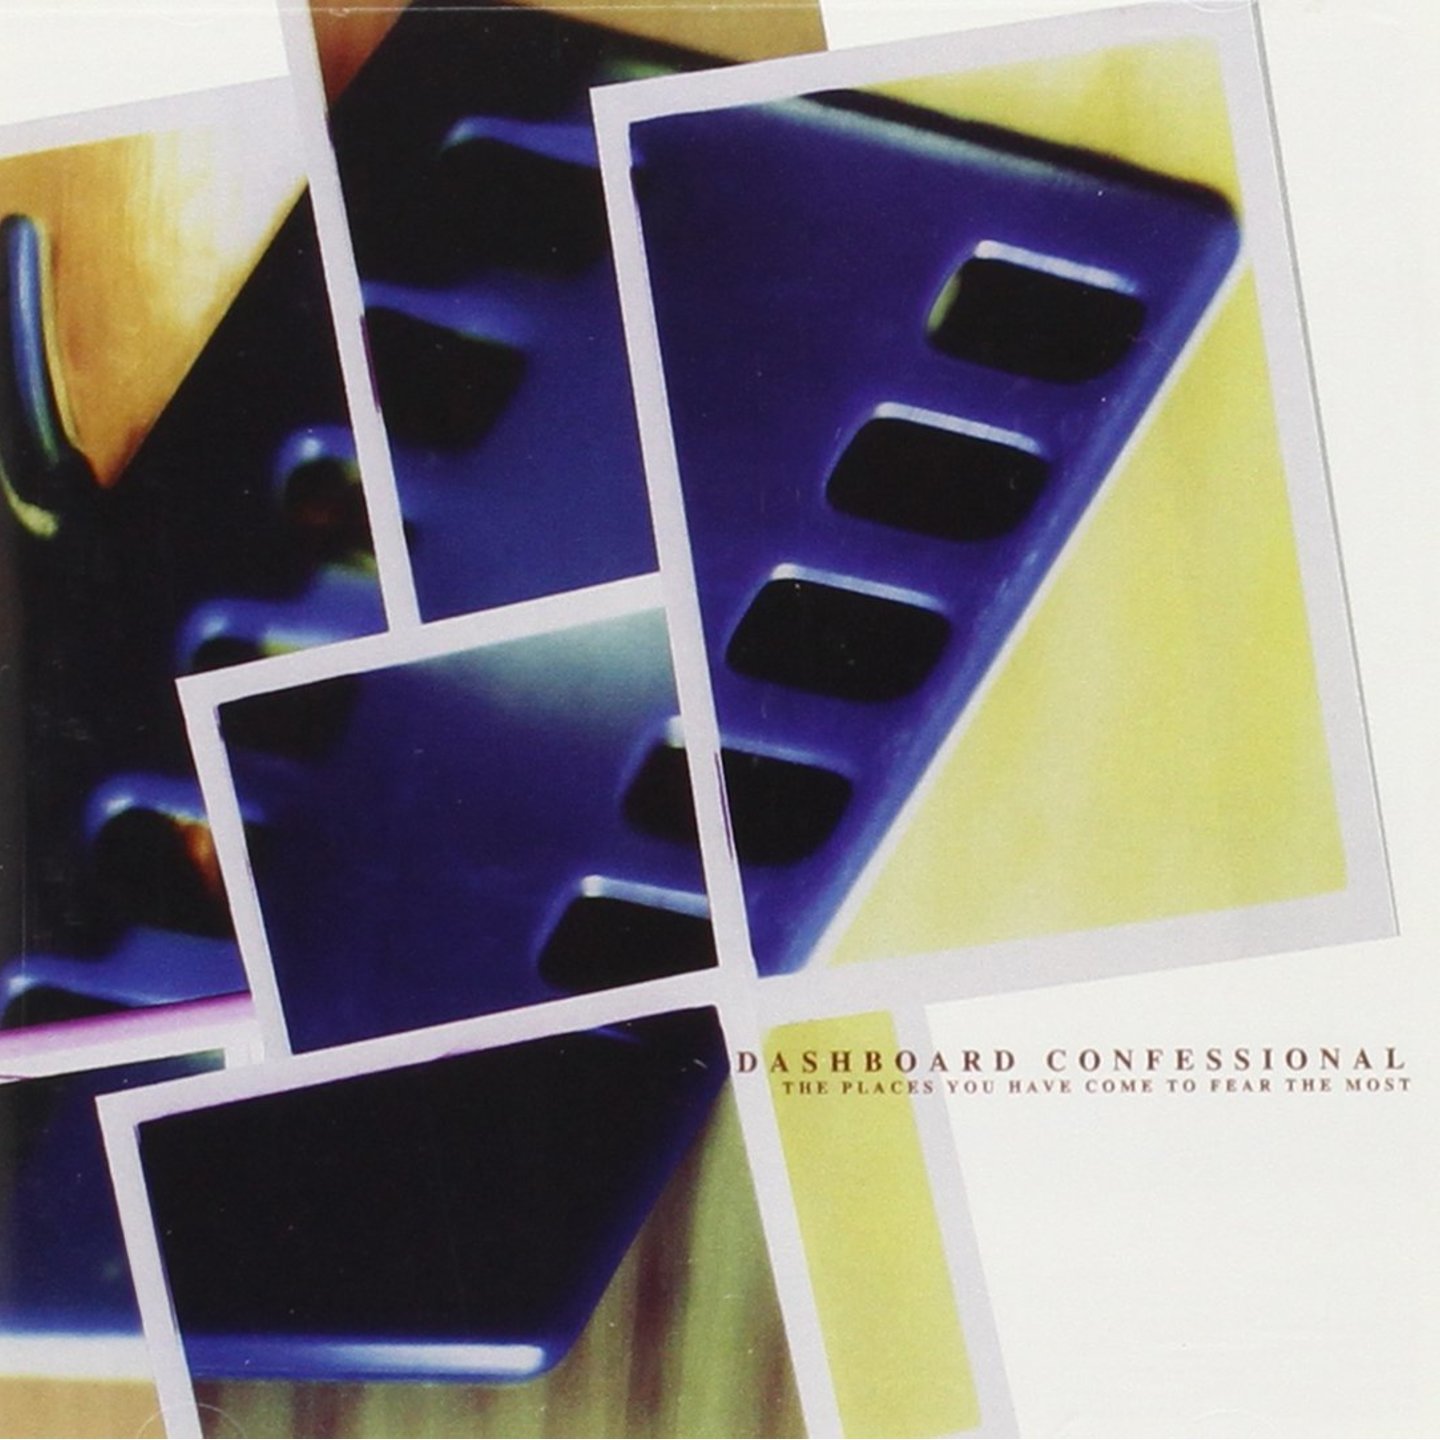 DASHBOARD CONFESSIONAL - The Places You Have Come To Fear The Most LP Indie, Colour Vinyl